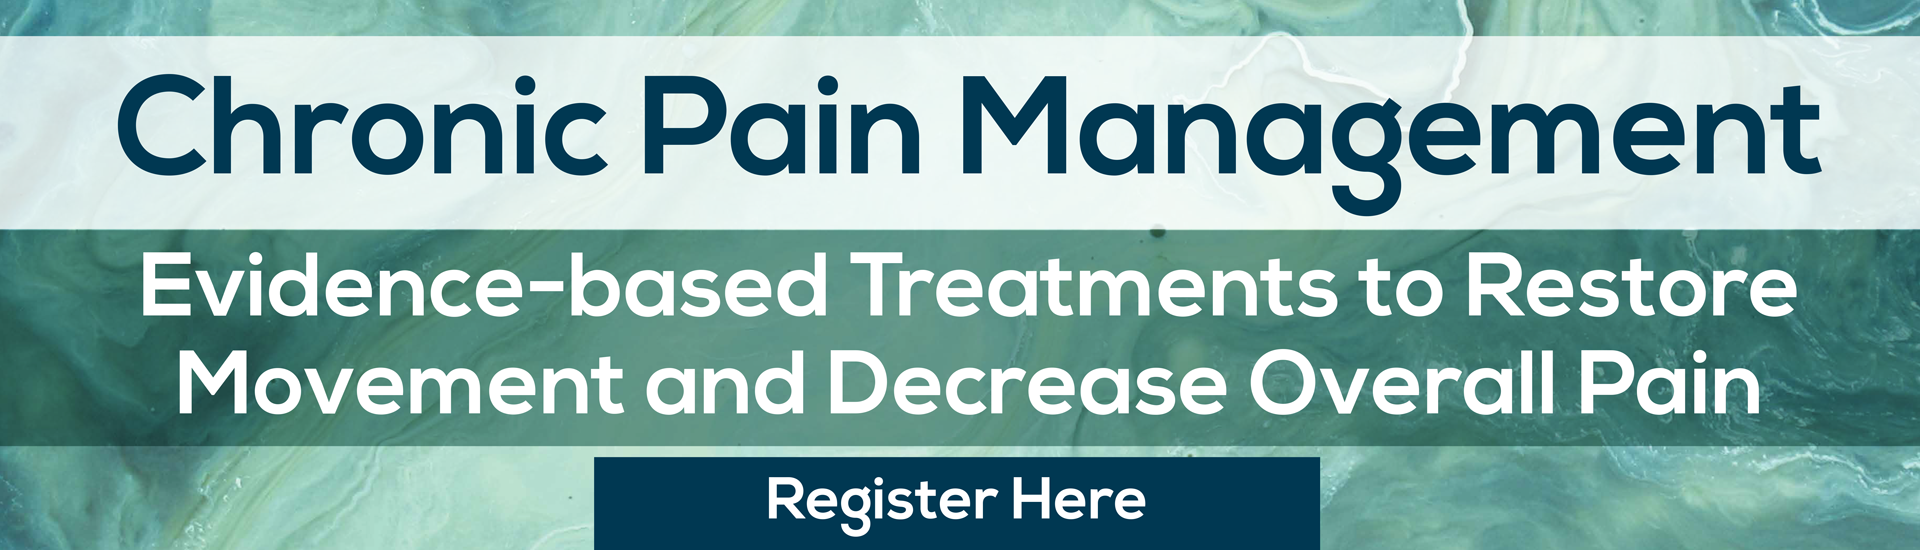 Chronic Pain Management: Evidence-based Treatments to Restore Movement and Decrease Overall Pain